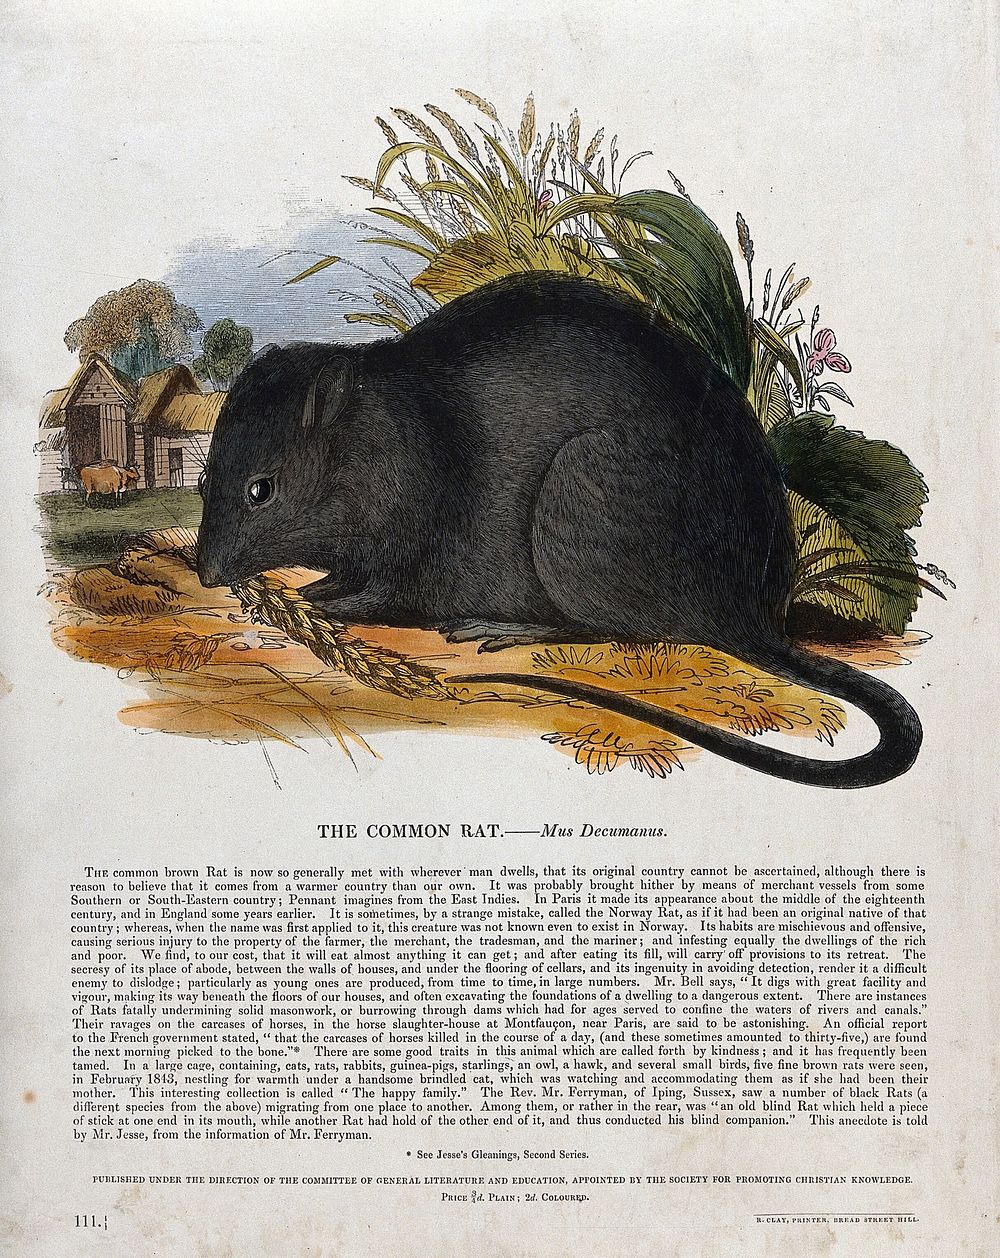 A rat nibbling on corn outside a farmyard. Coloured wood engraving by J. W. Whimper.